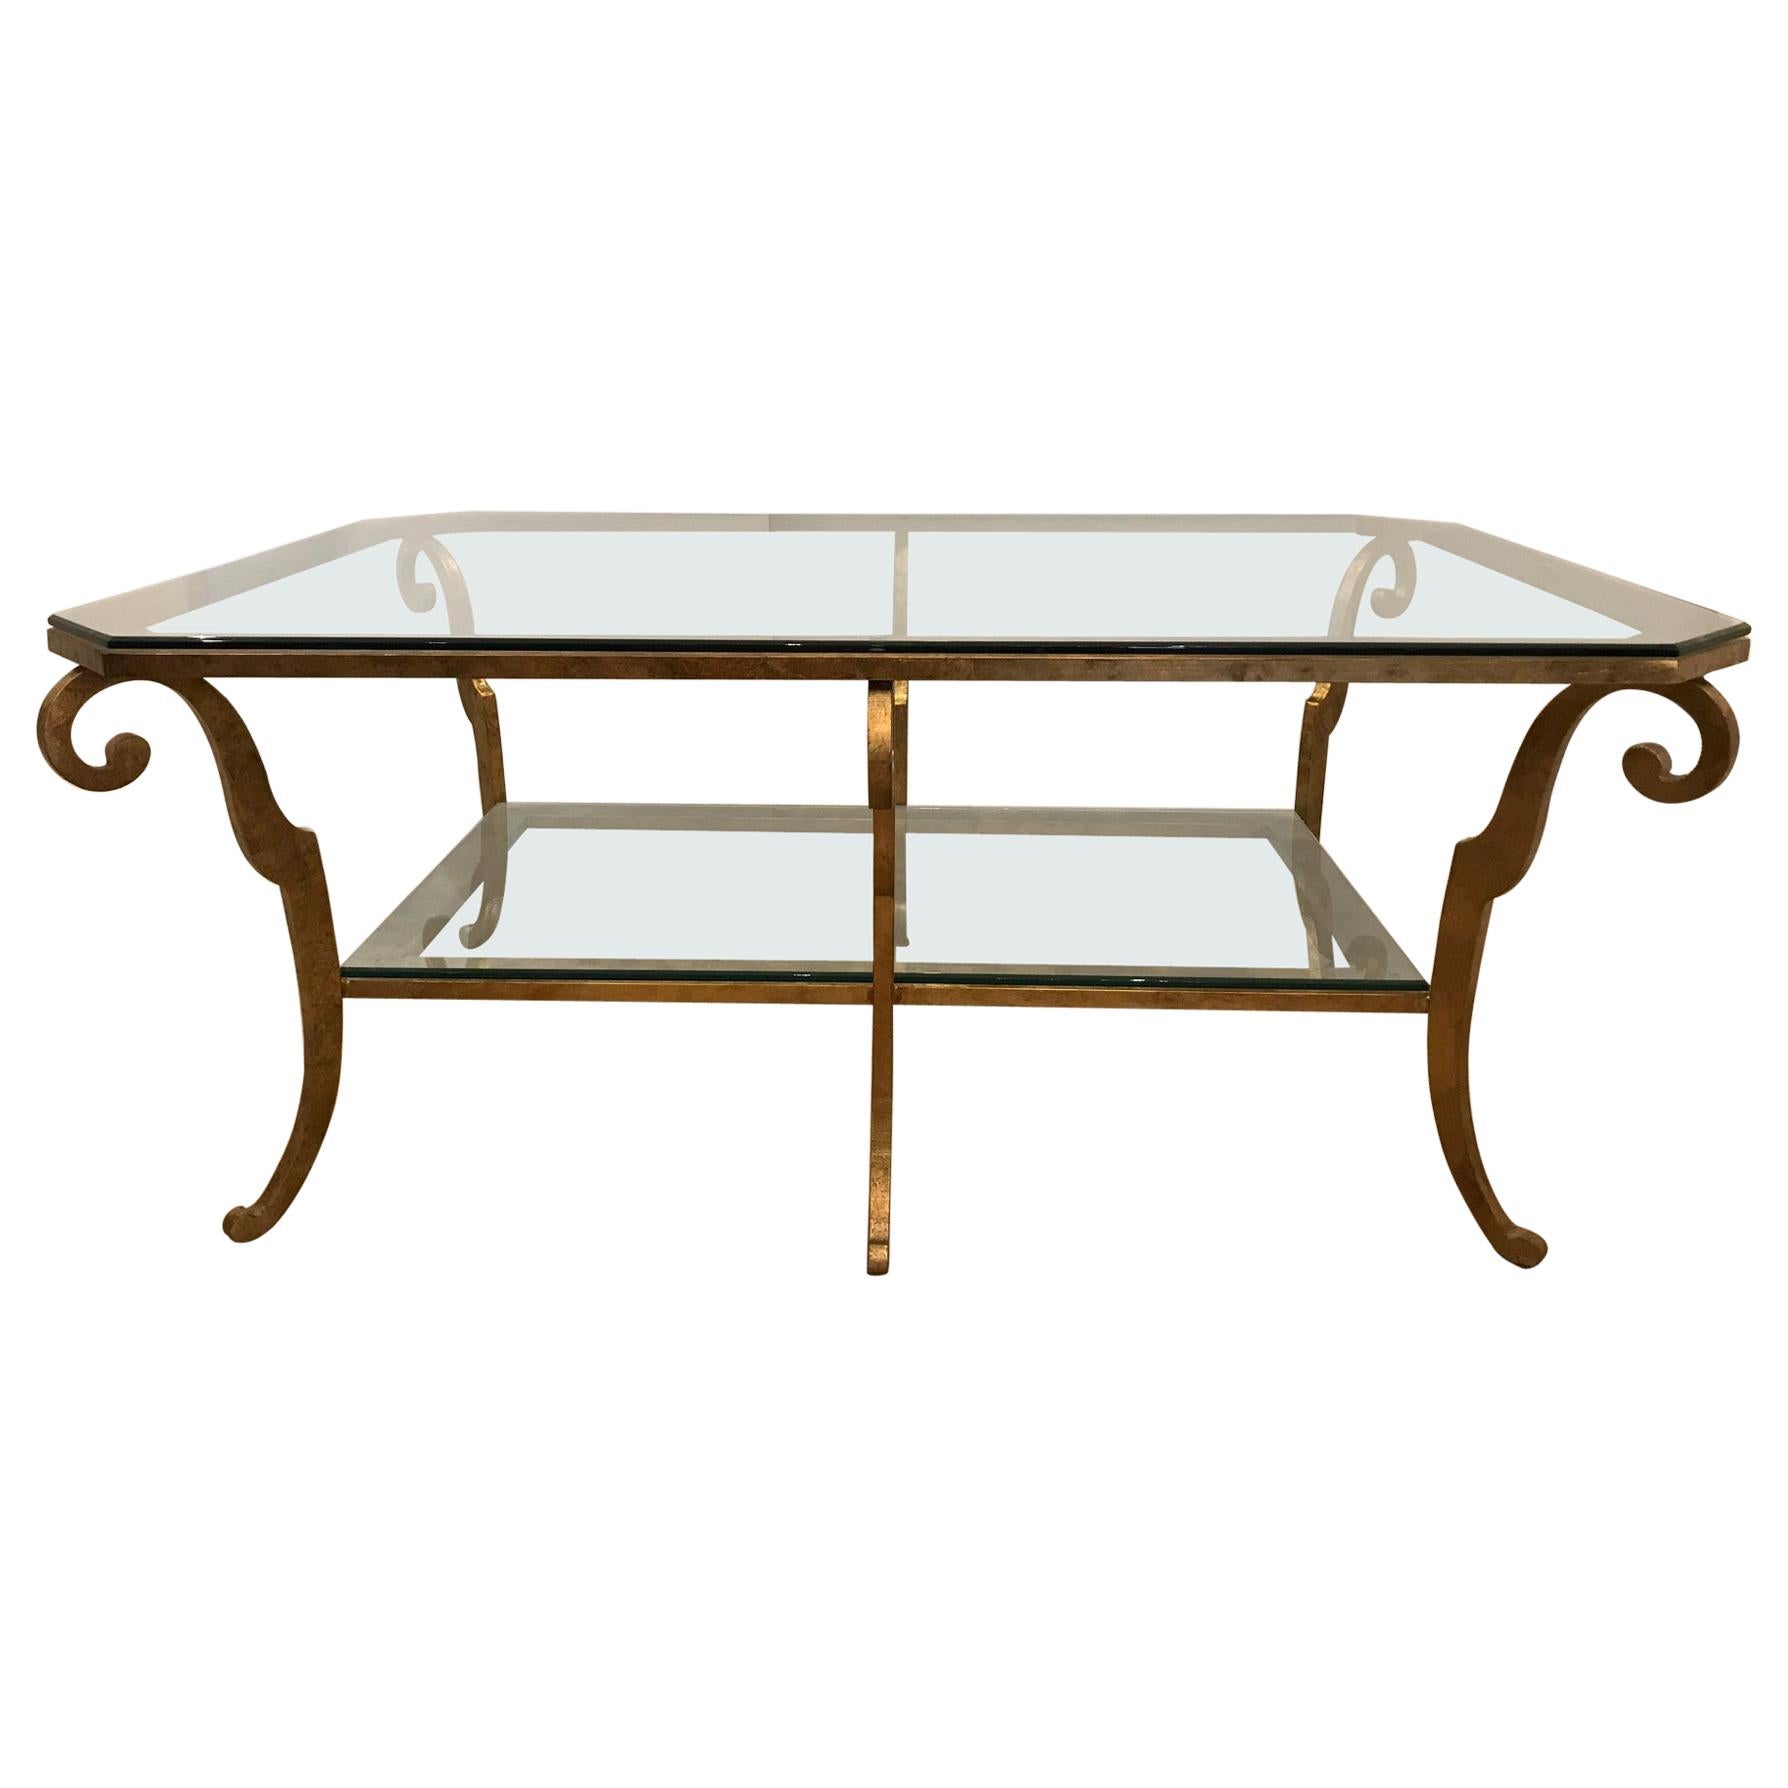 Impressive Gilt Iron and Glass Two-Tier Coffee Table